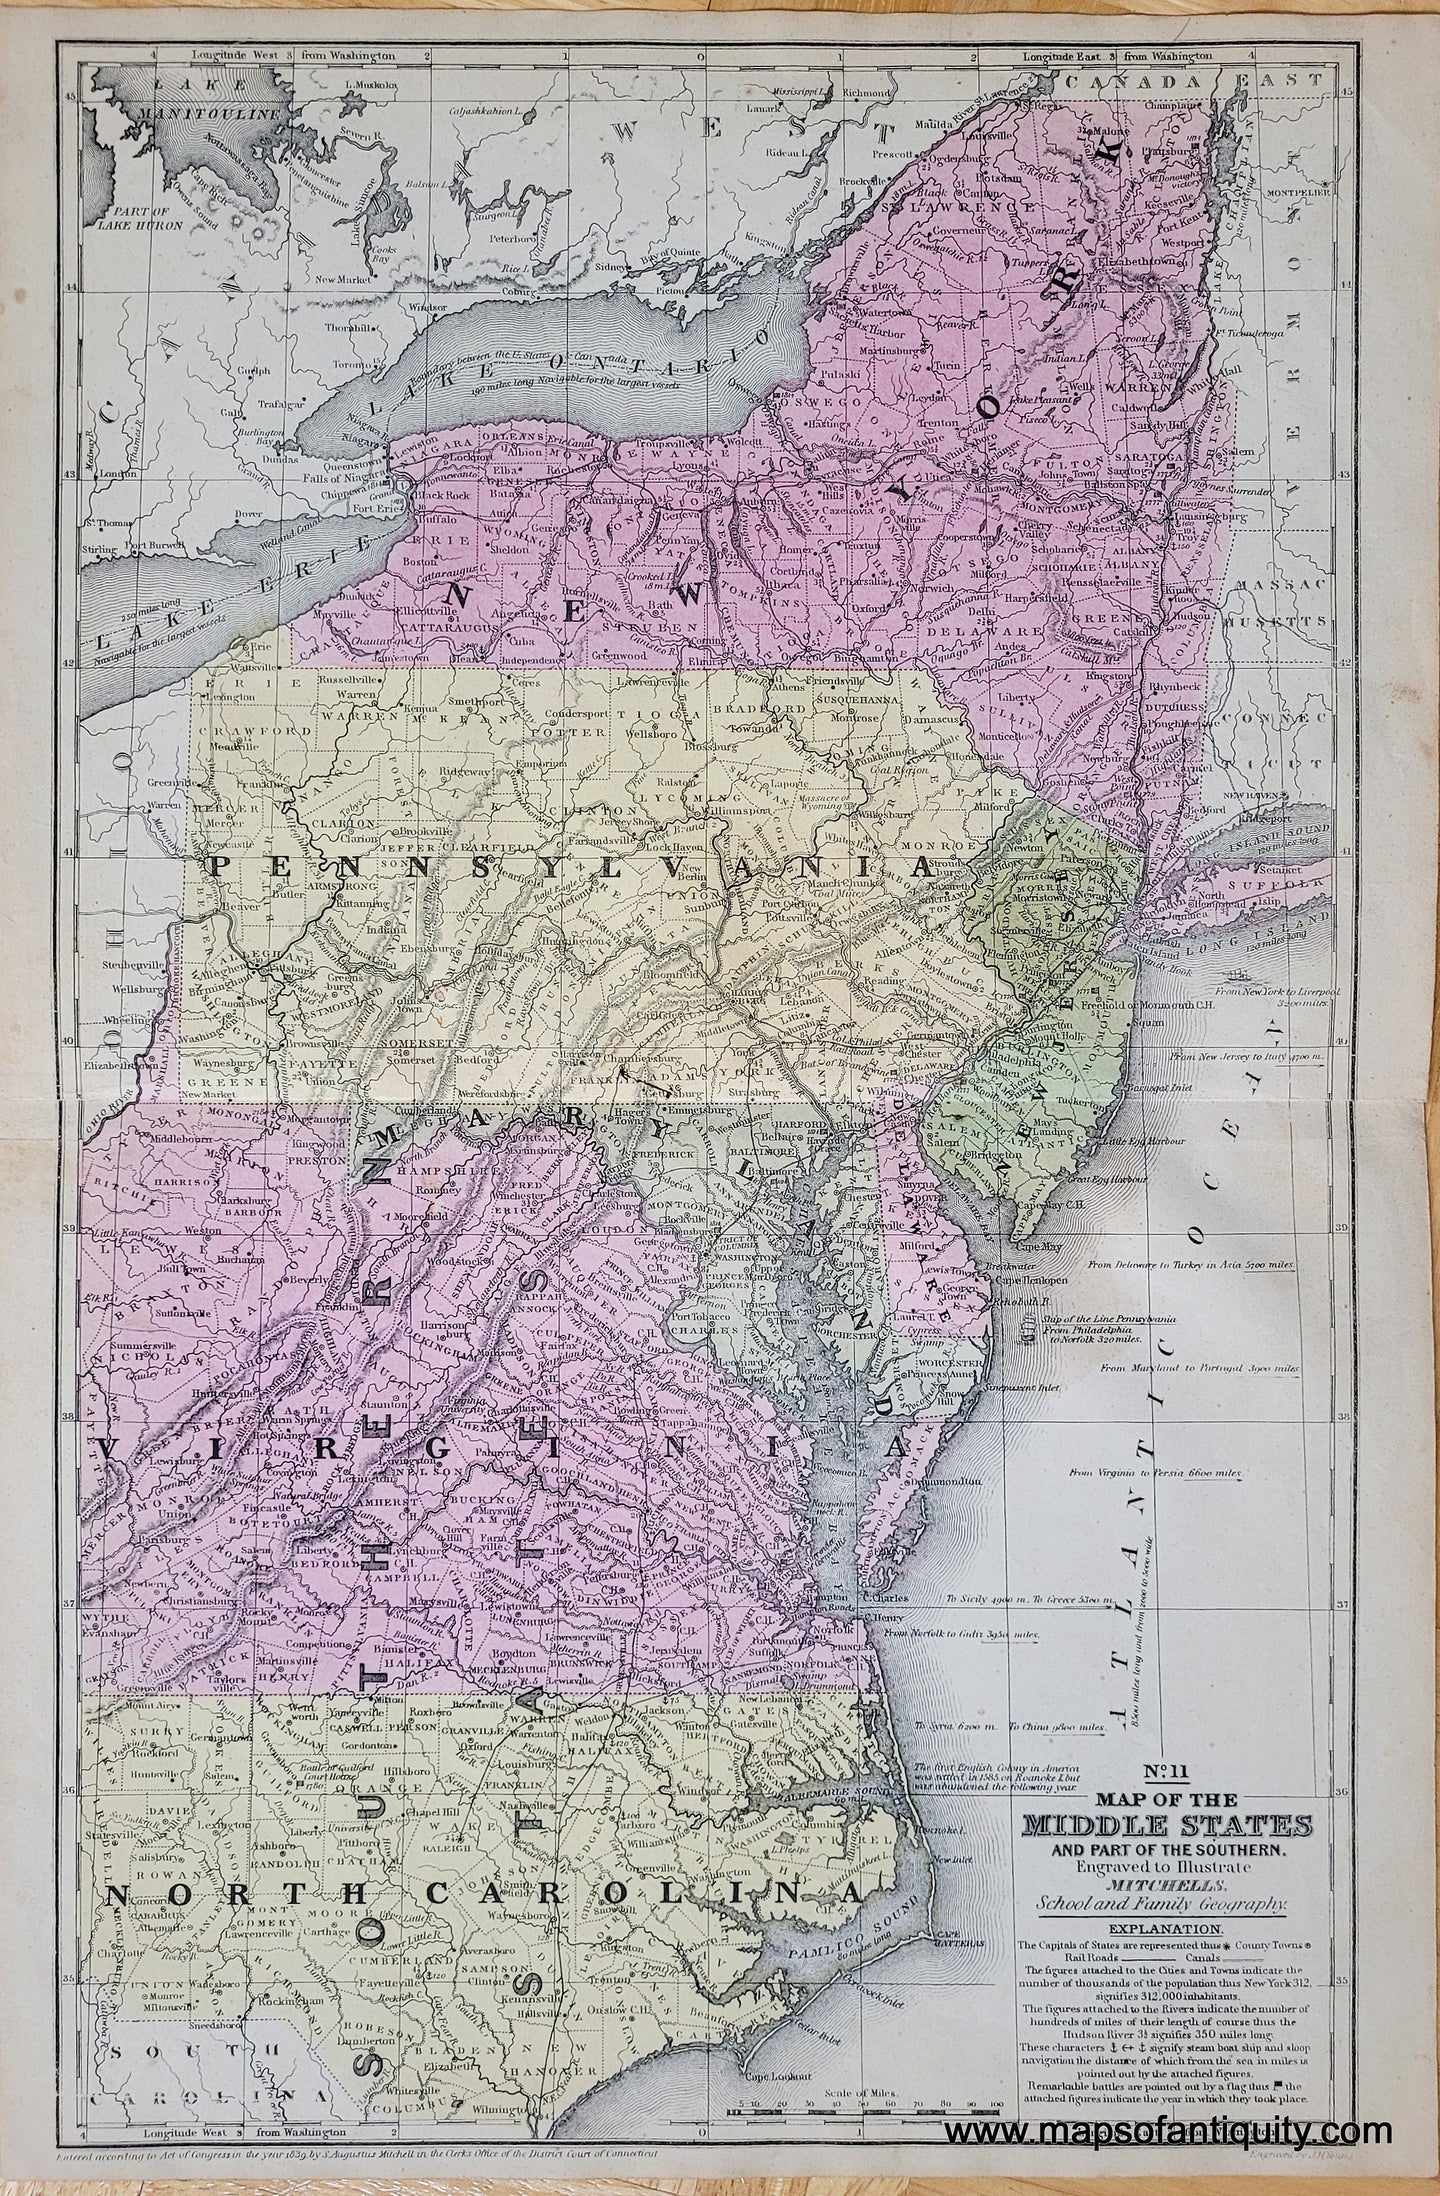 Genuine-Antique-Map-No-11-Map-of-the-Middle-States-and-Part-of-the-Southern-Engraved-to-Illustrate-Mitchells-School-and-Family-Geography-Mid-Atlantic-General-New-York-State-Pennsylvania-New-Jersey-Maryland-Delaware-Virginia-North-Carolina-1851-Mitchell-Maps-Of-Antiquity-1800s-19th-century